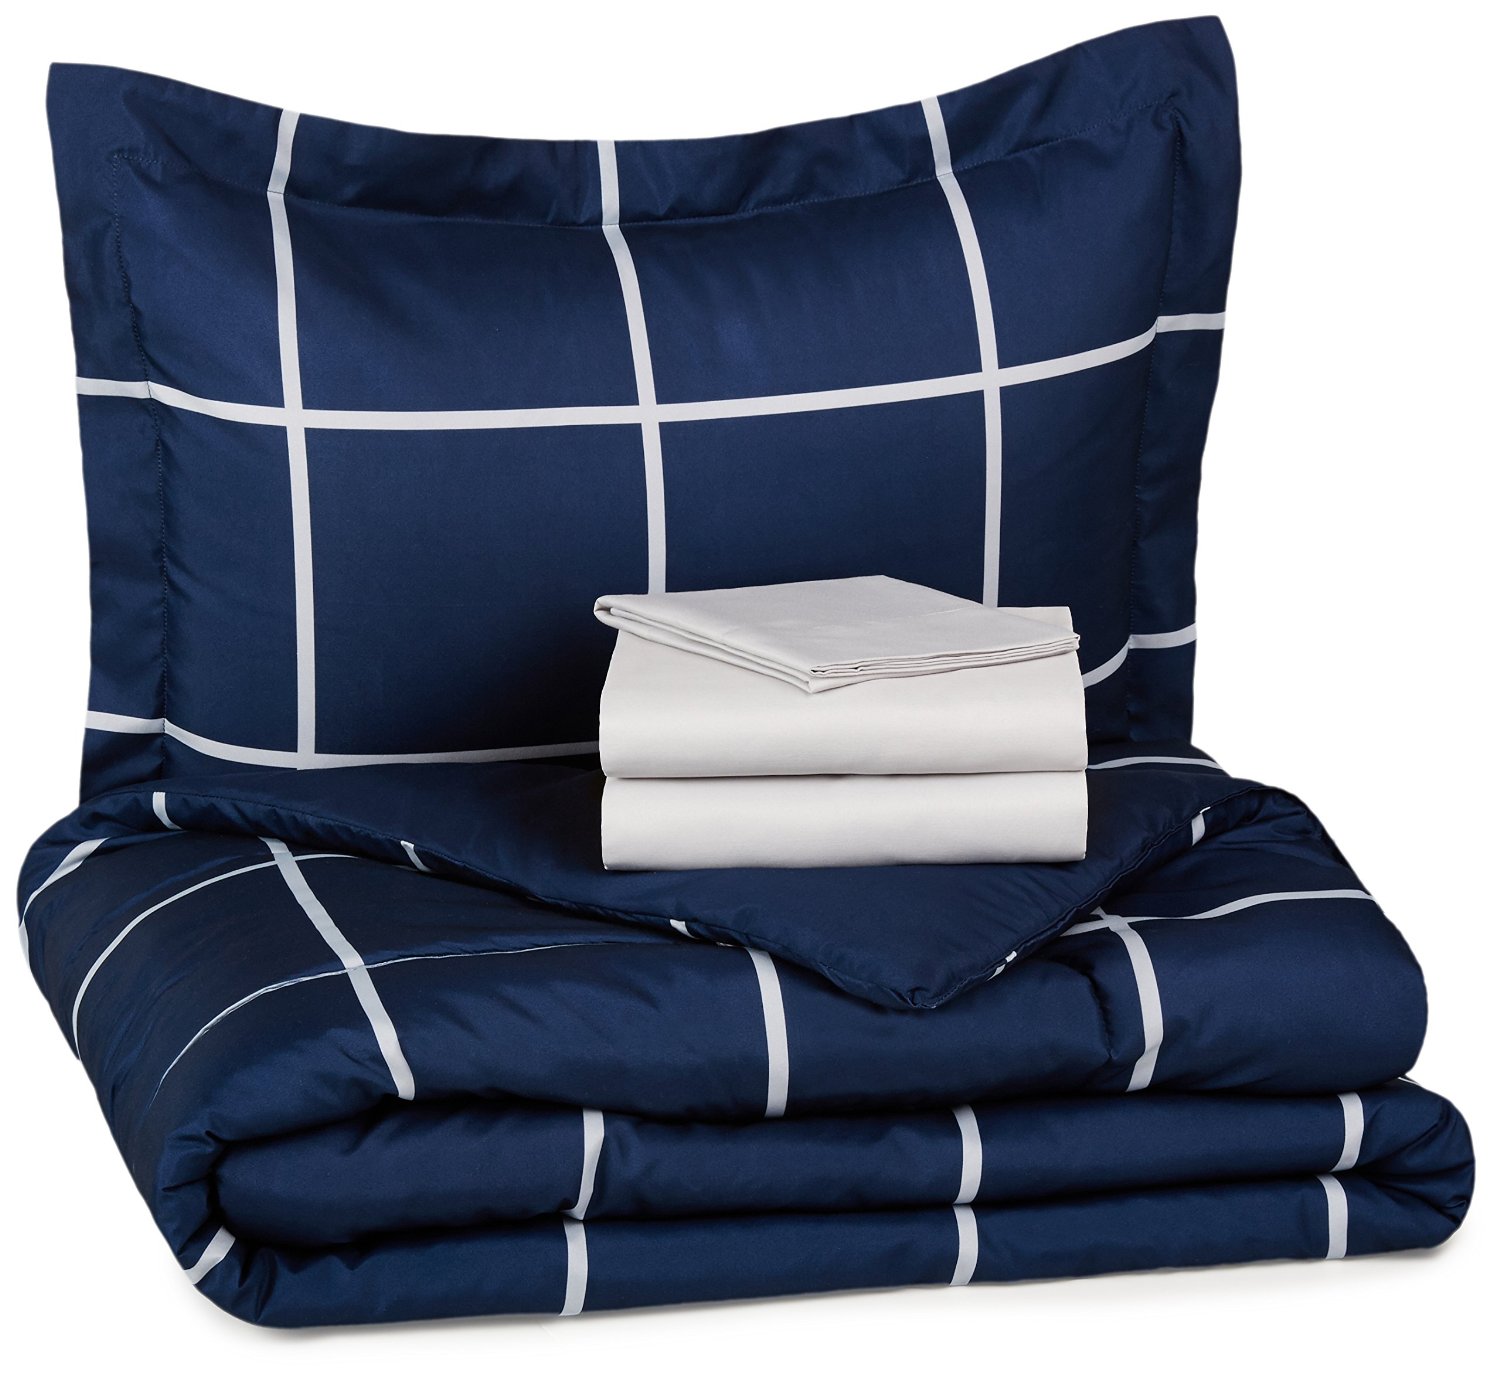 AmazonBasics 5-Piece Bed-In-A-Bag - Twin/Twin Extra-Long, Navy Simple Plaid